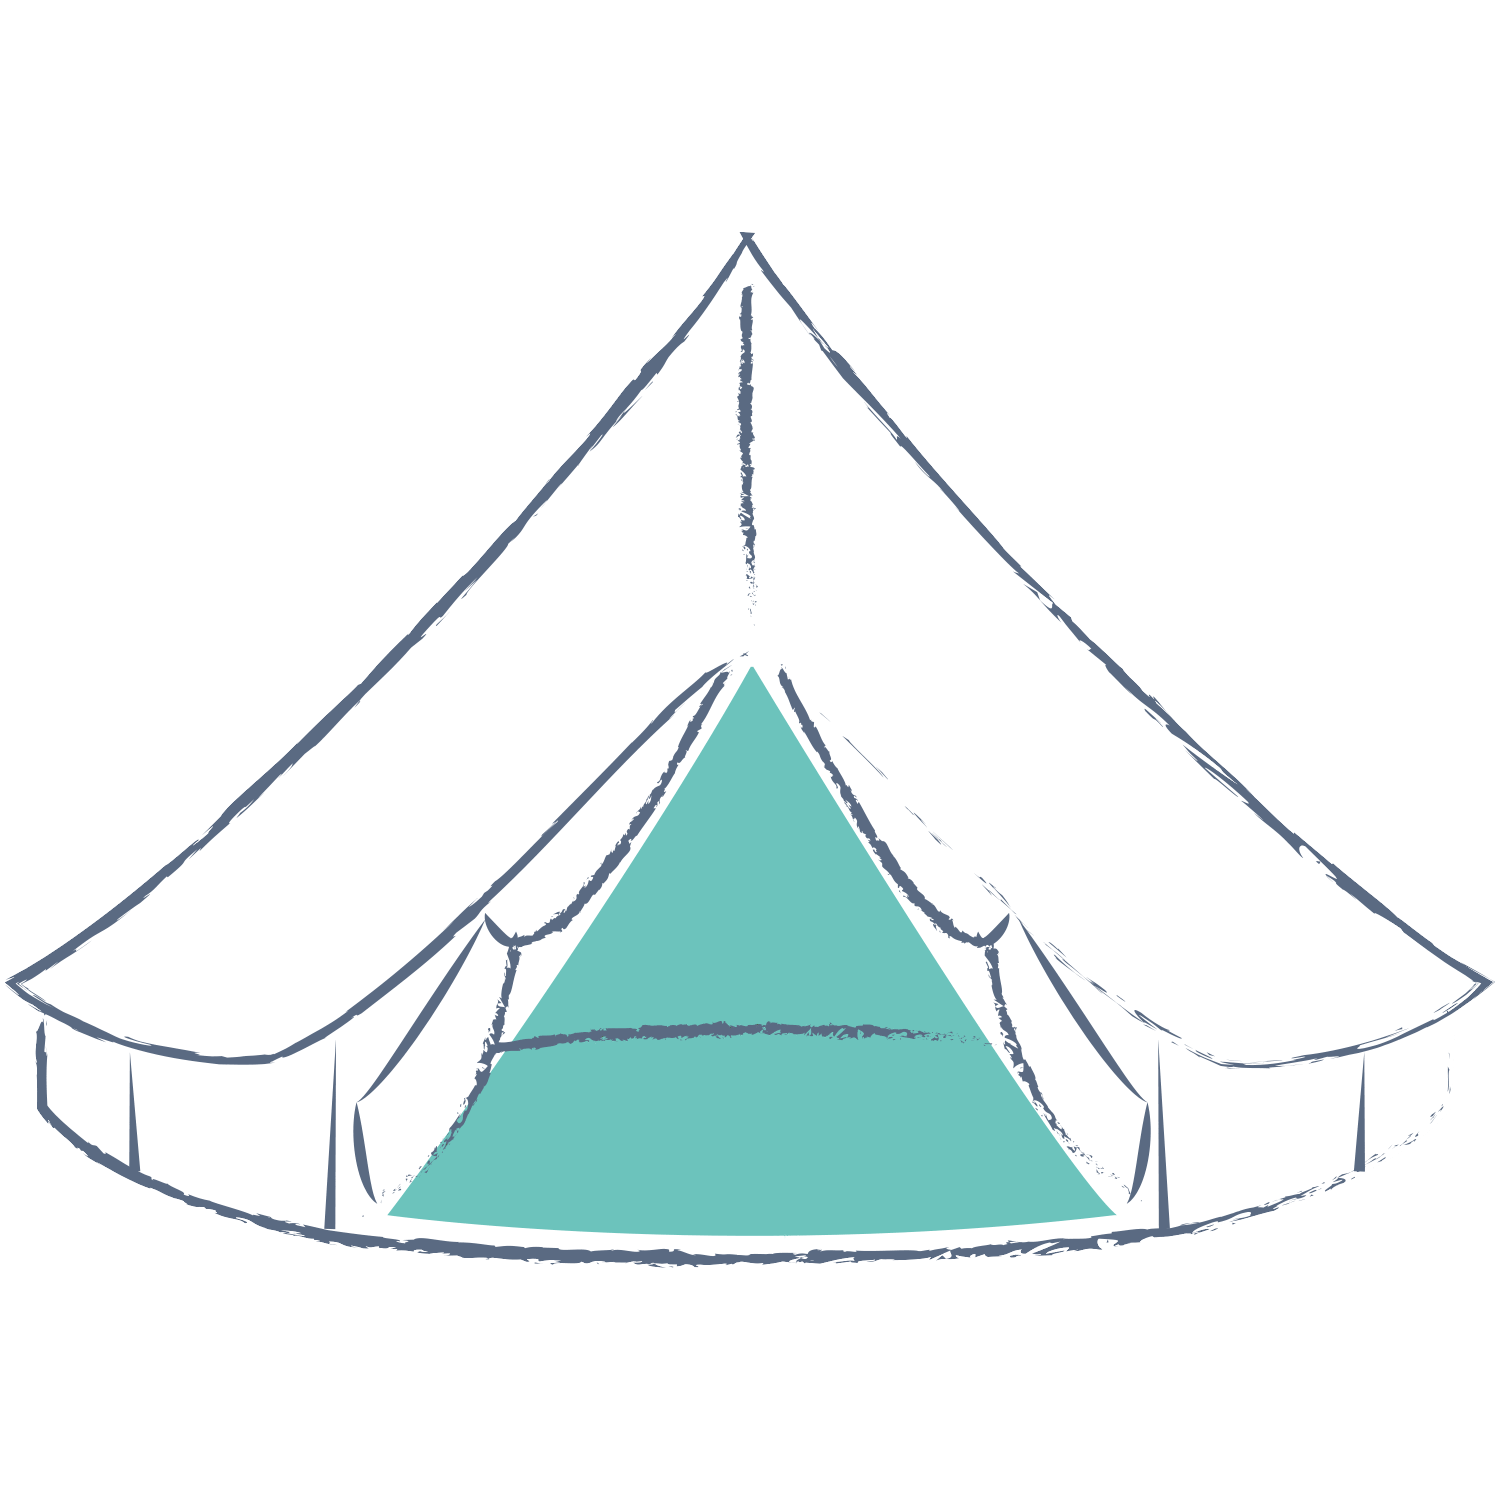 Bell Tents